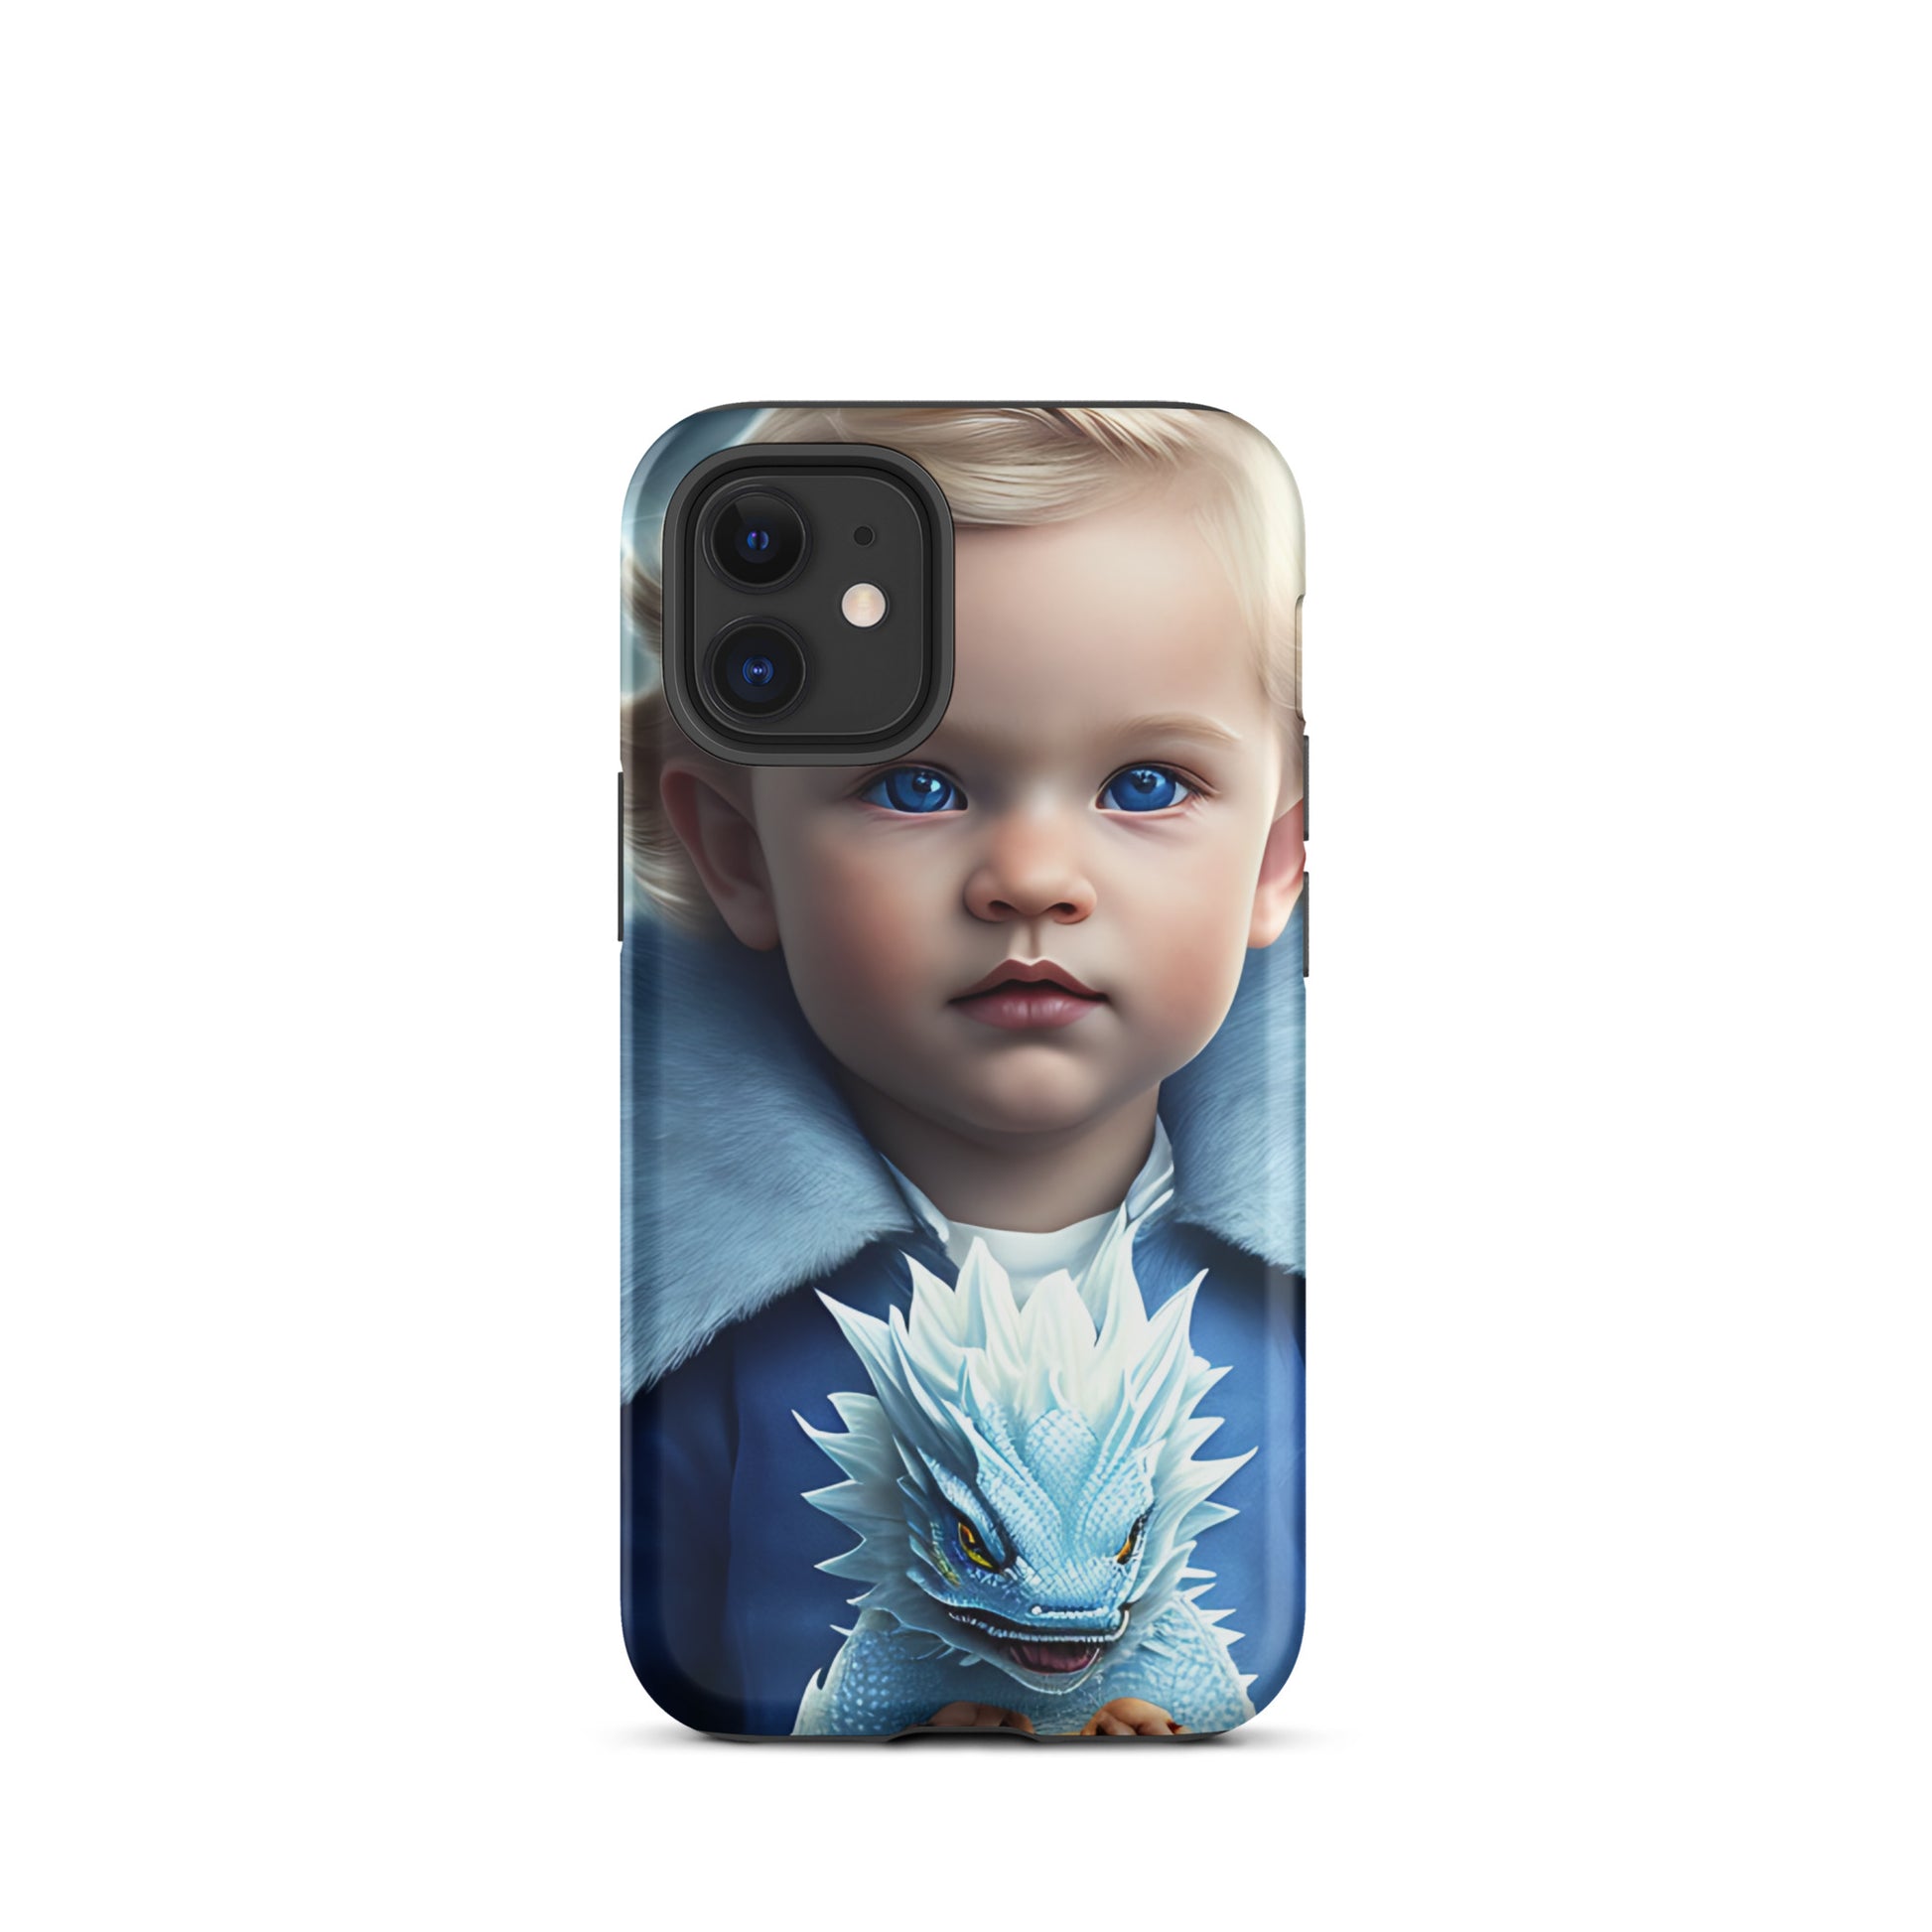 A picture of a an iphone case with a blond haired blue eyed boy, blue top holding a baby ice dragon in front - Dragon Prince #2 tough iphone case - matte-iphone-12-mini-front